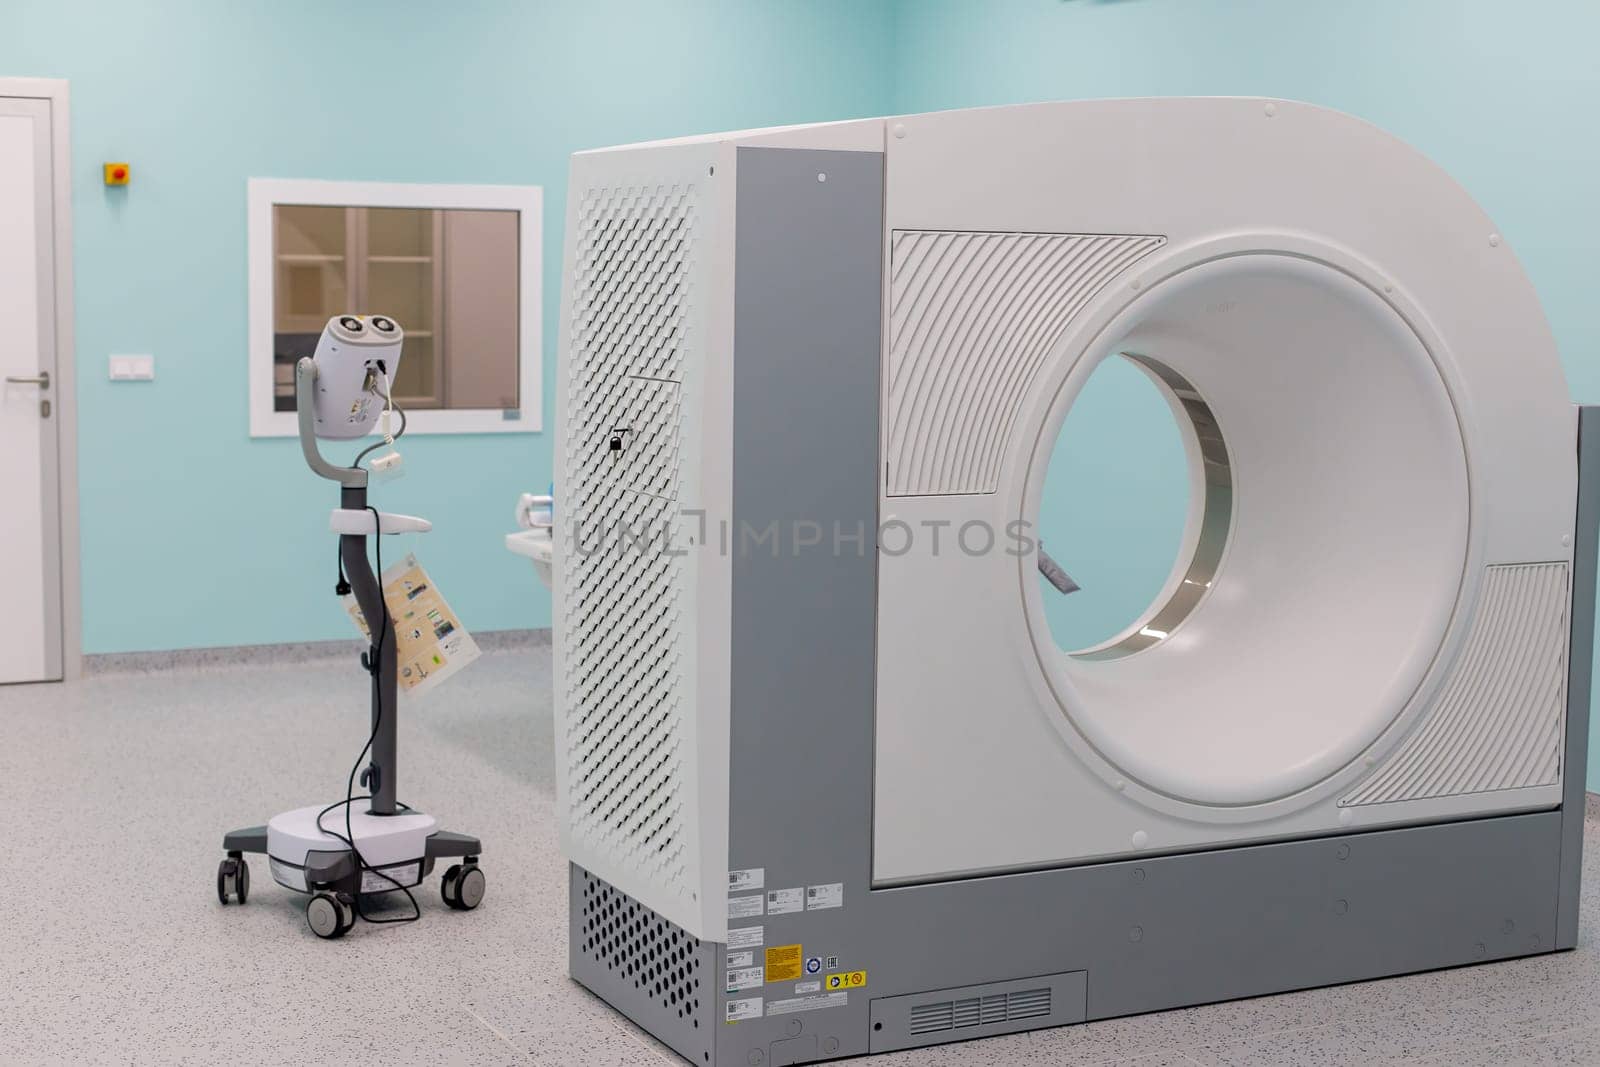 Moscow, Moscow region, Russia - 03.09.2023:A high-tech CT scanner in a clean, empty hospital radiology room by Zakharova